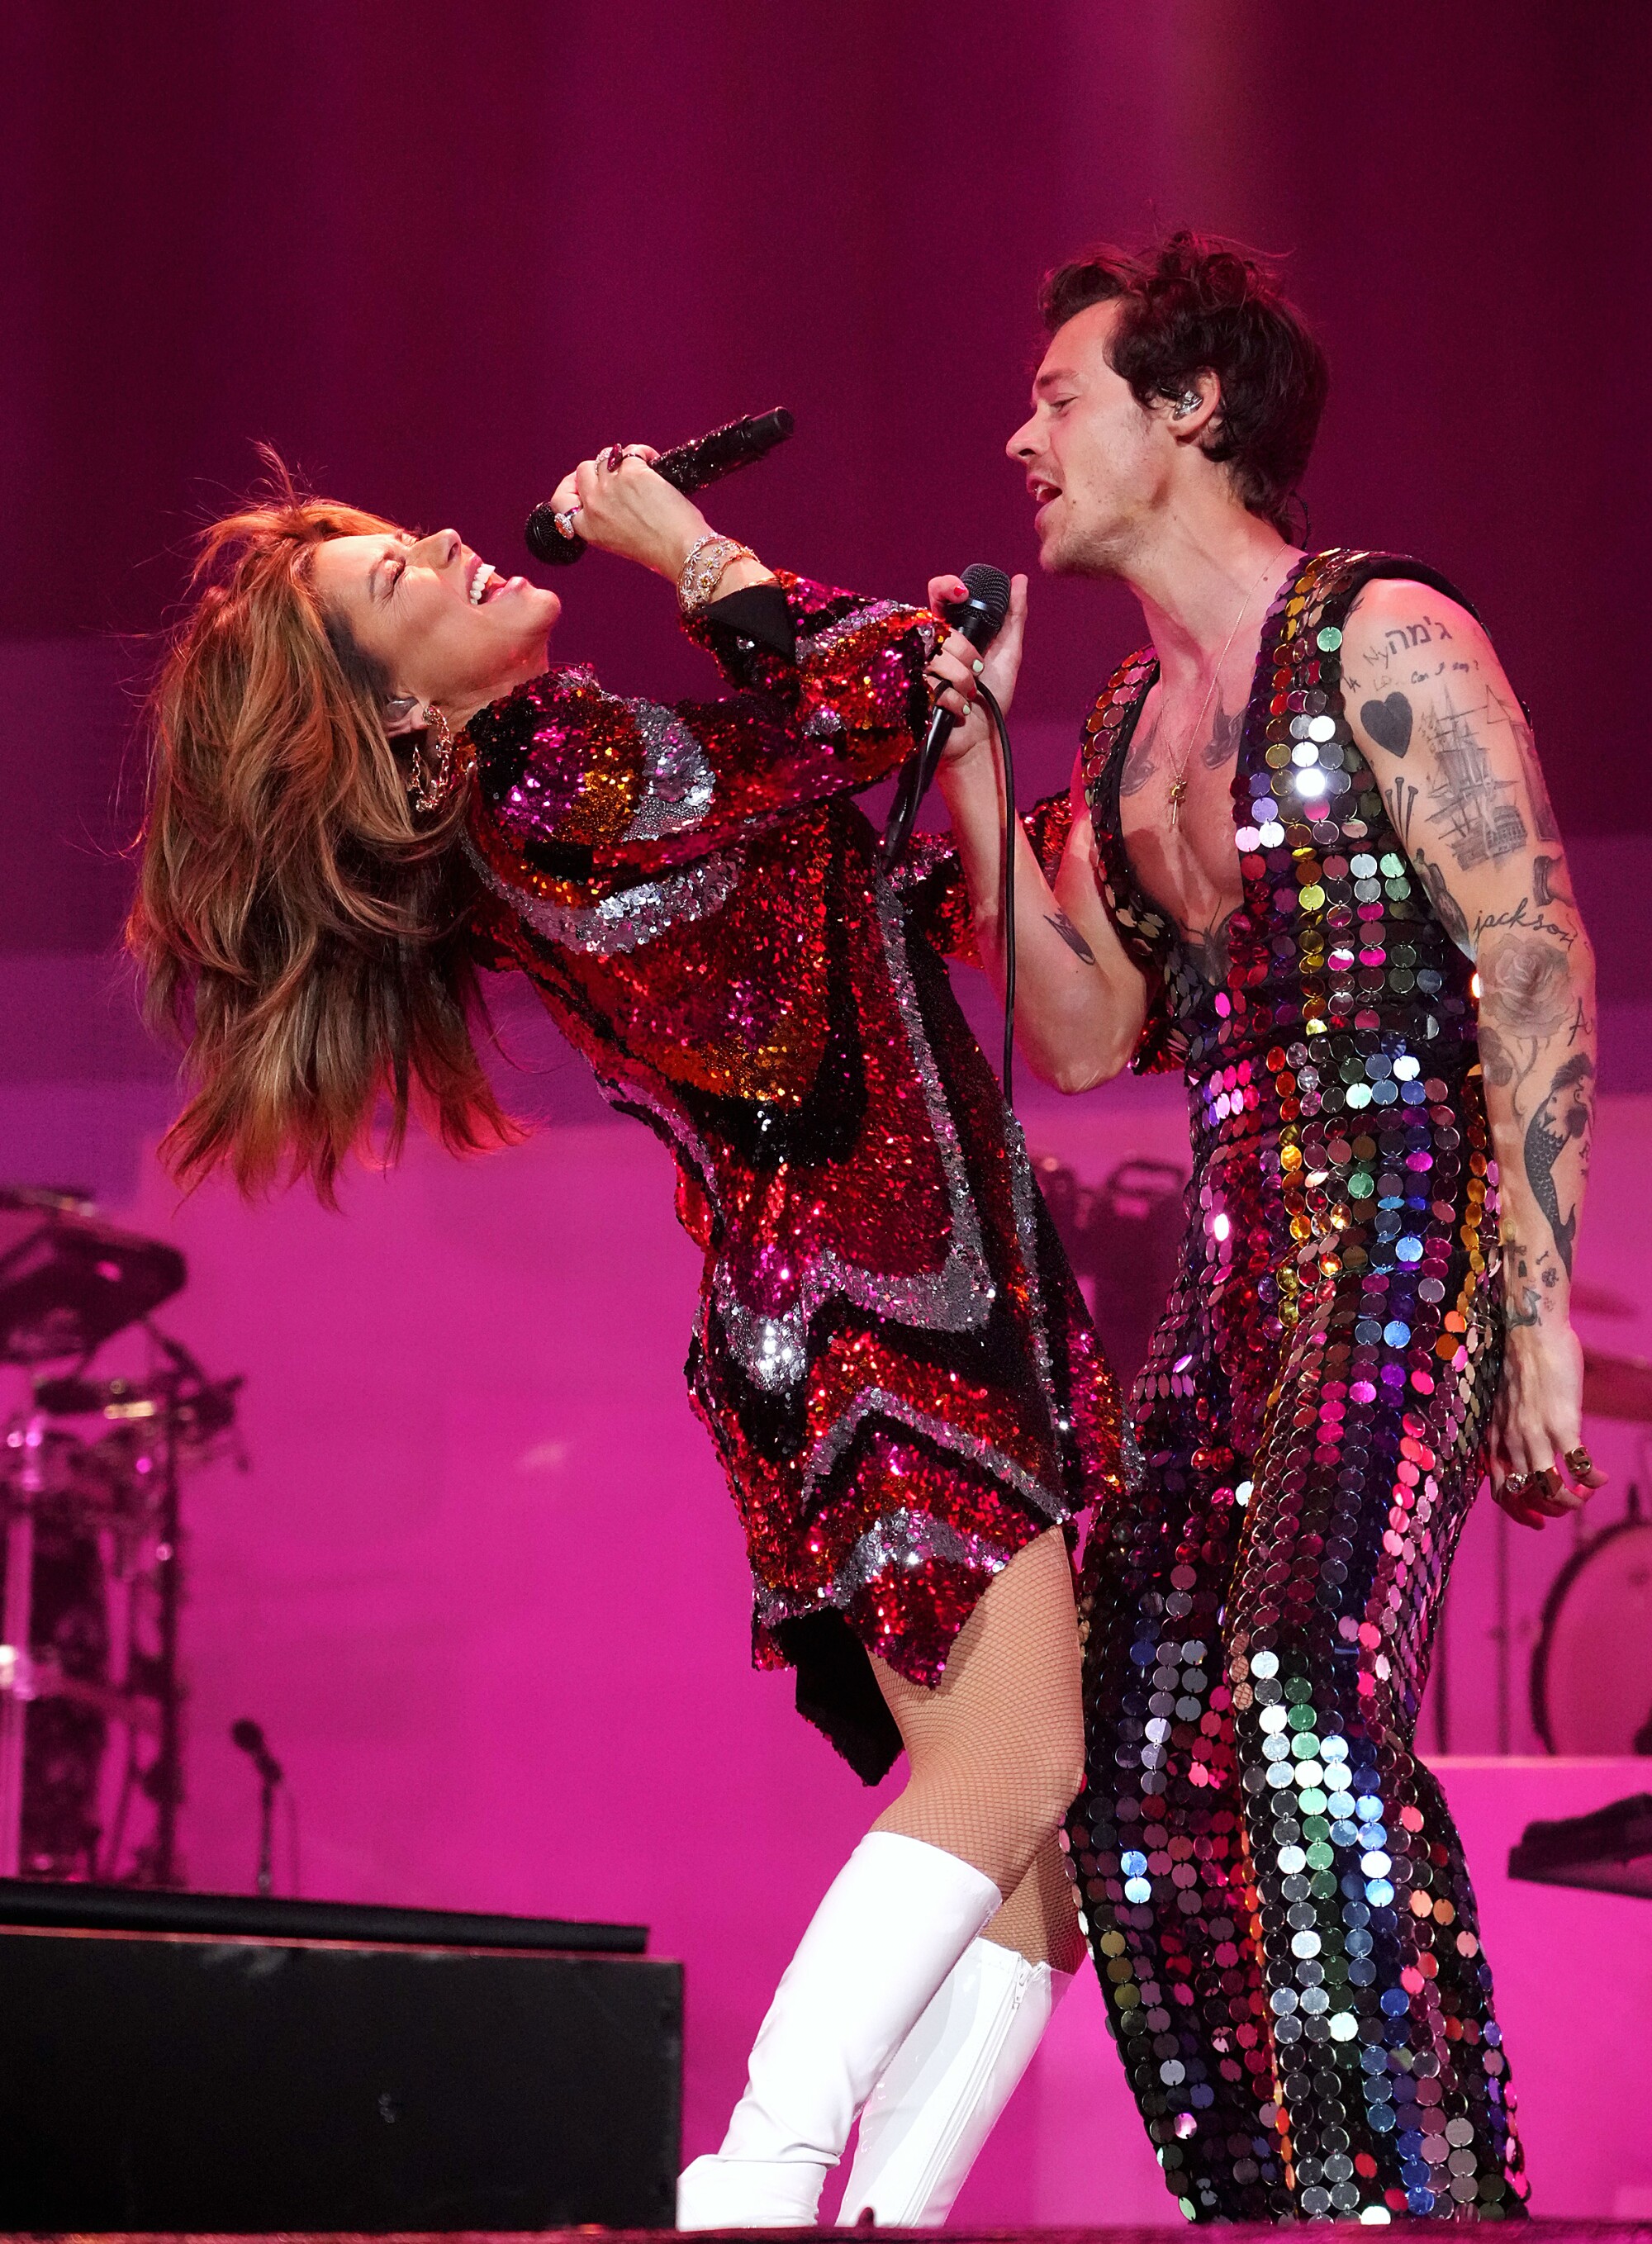 Shania Twain and Harry Styles perform in sparkly outfits.